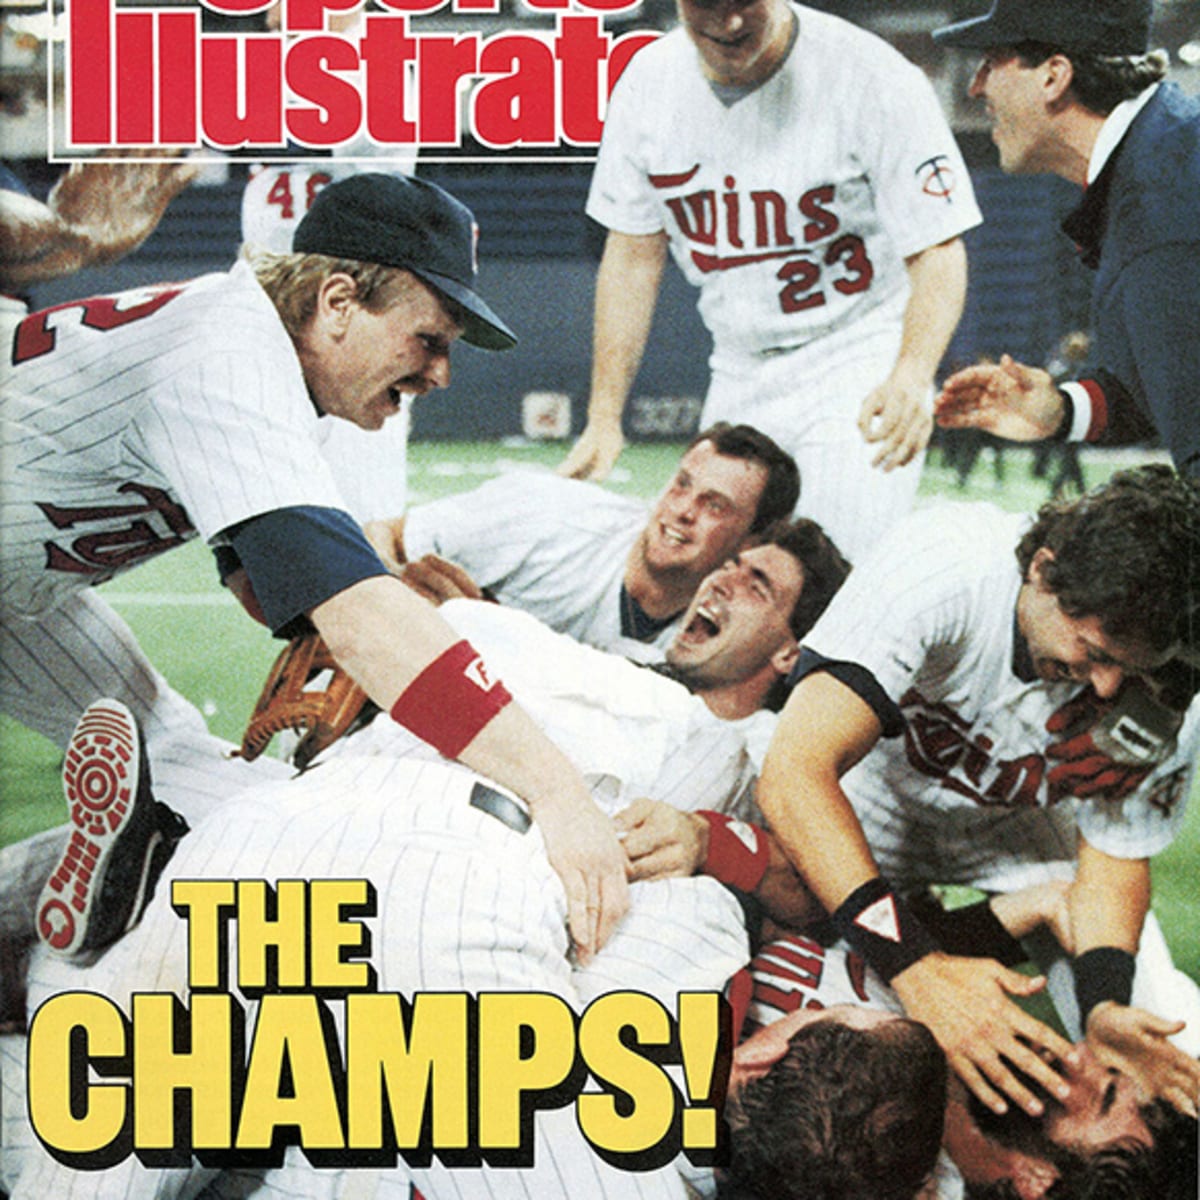 THESE ARE RED LETTER DAYS - Sports Illustrated Vault